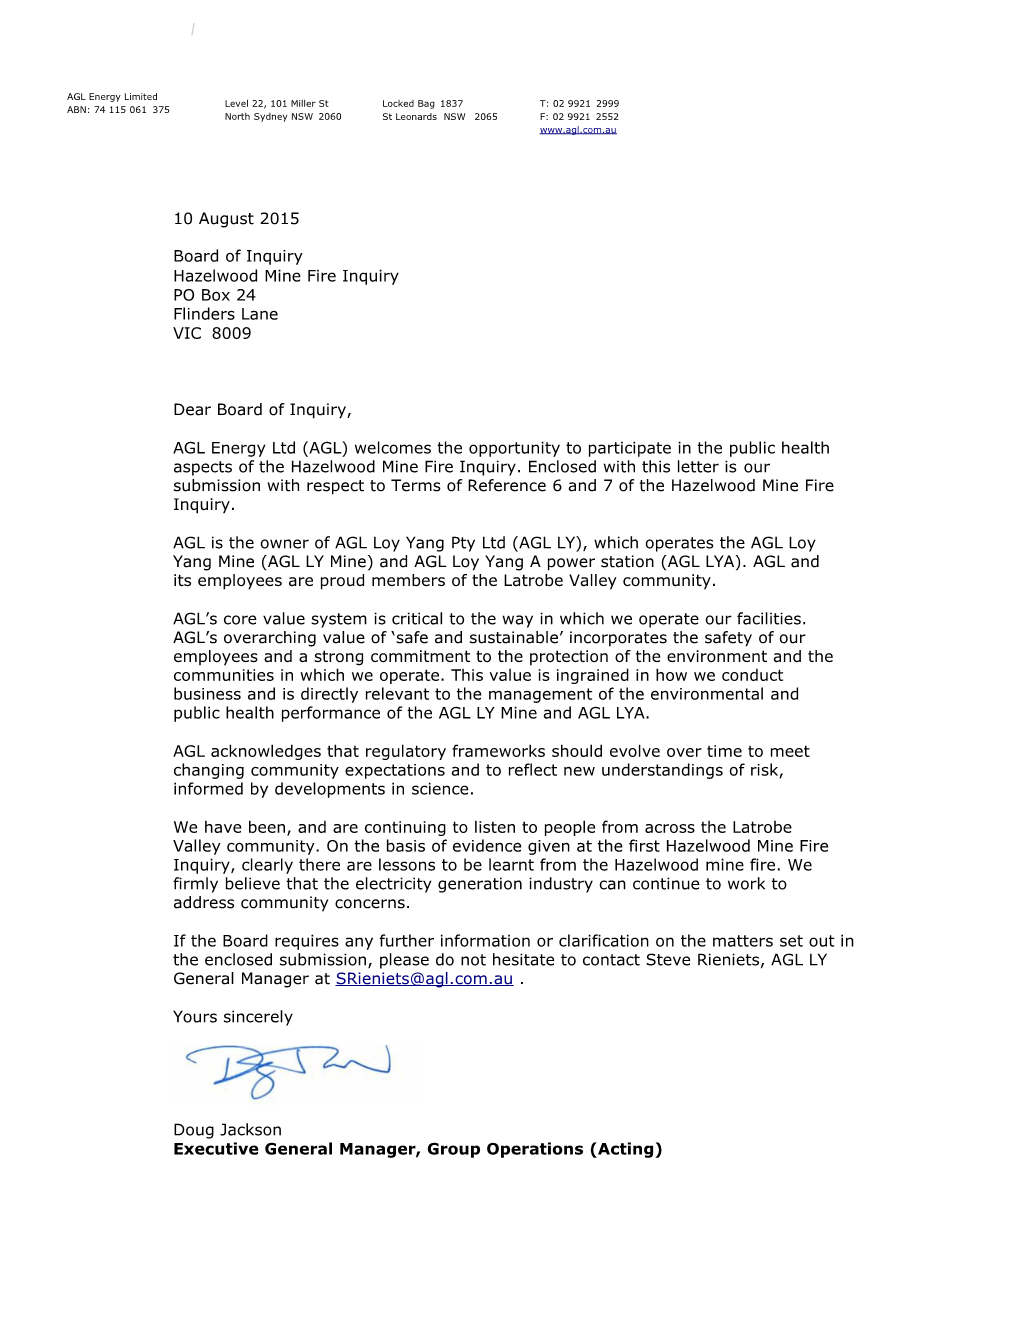 Letter from Djackson to HMFI Inquiry - 10 August 2015 DS EDITS (3)